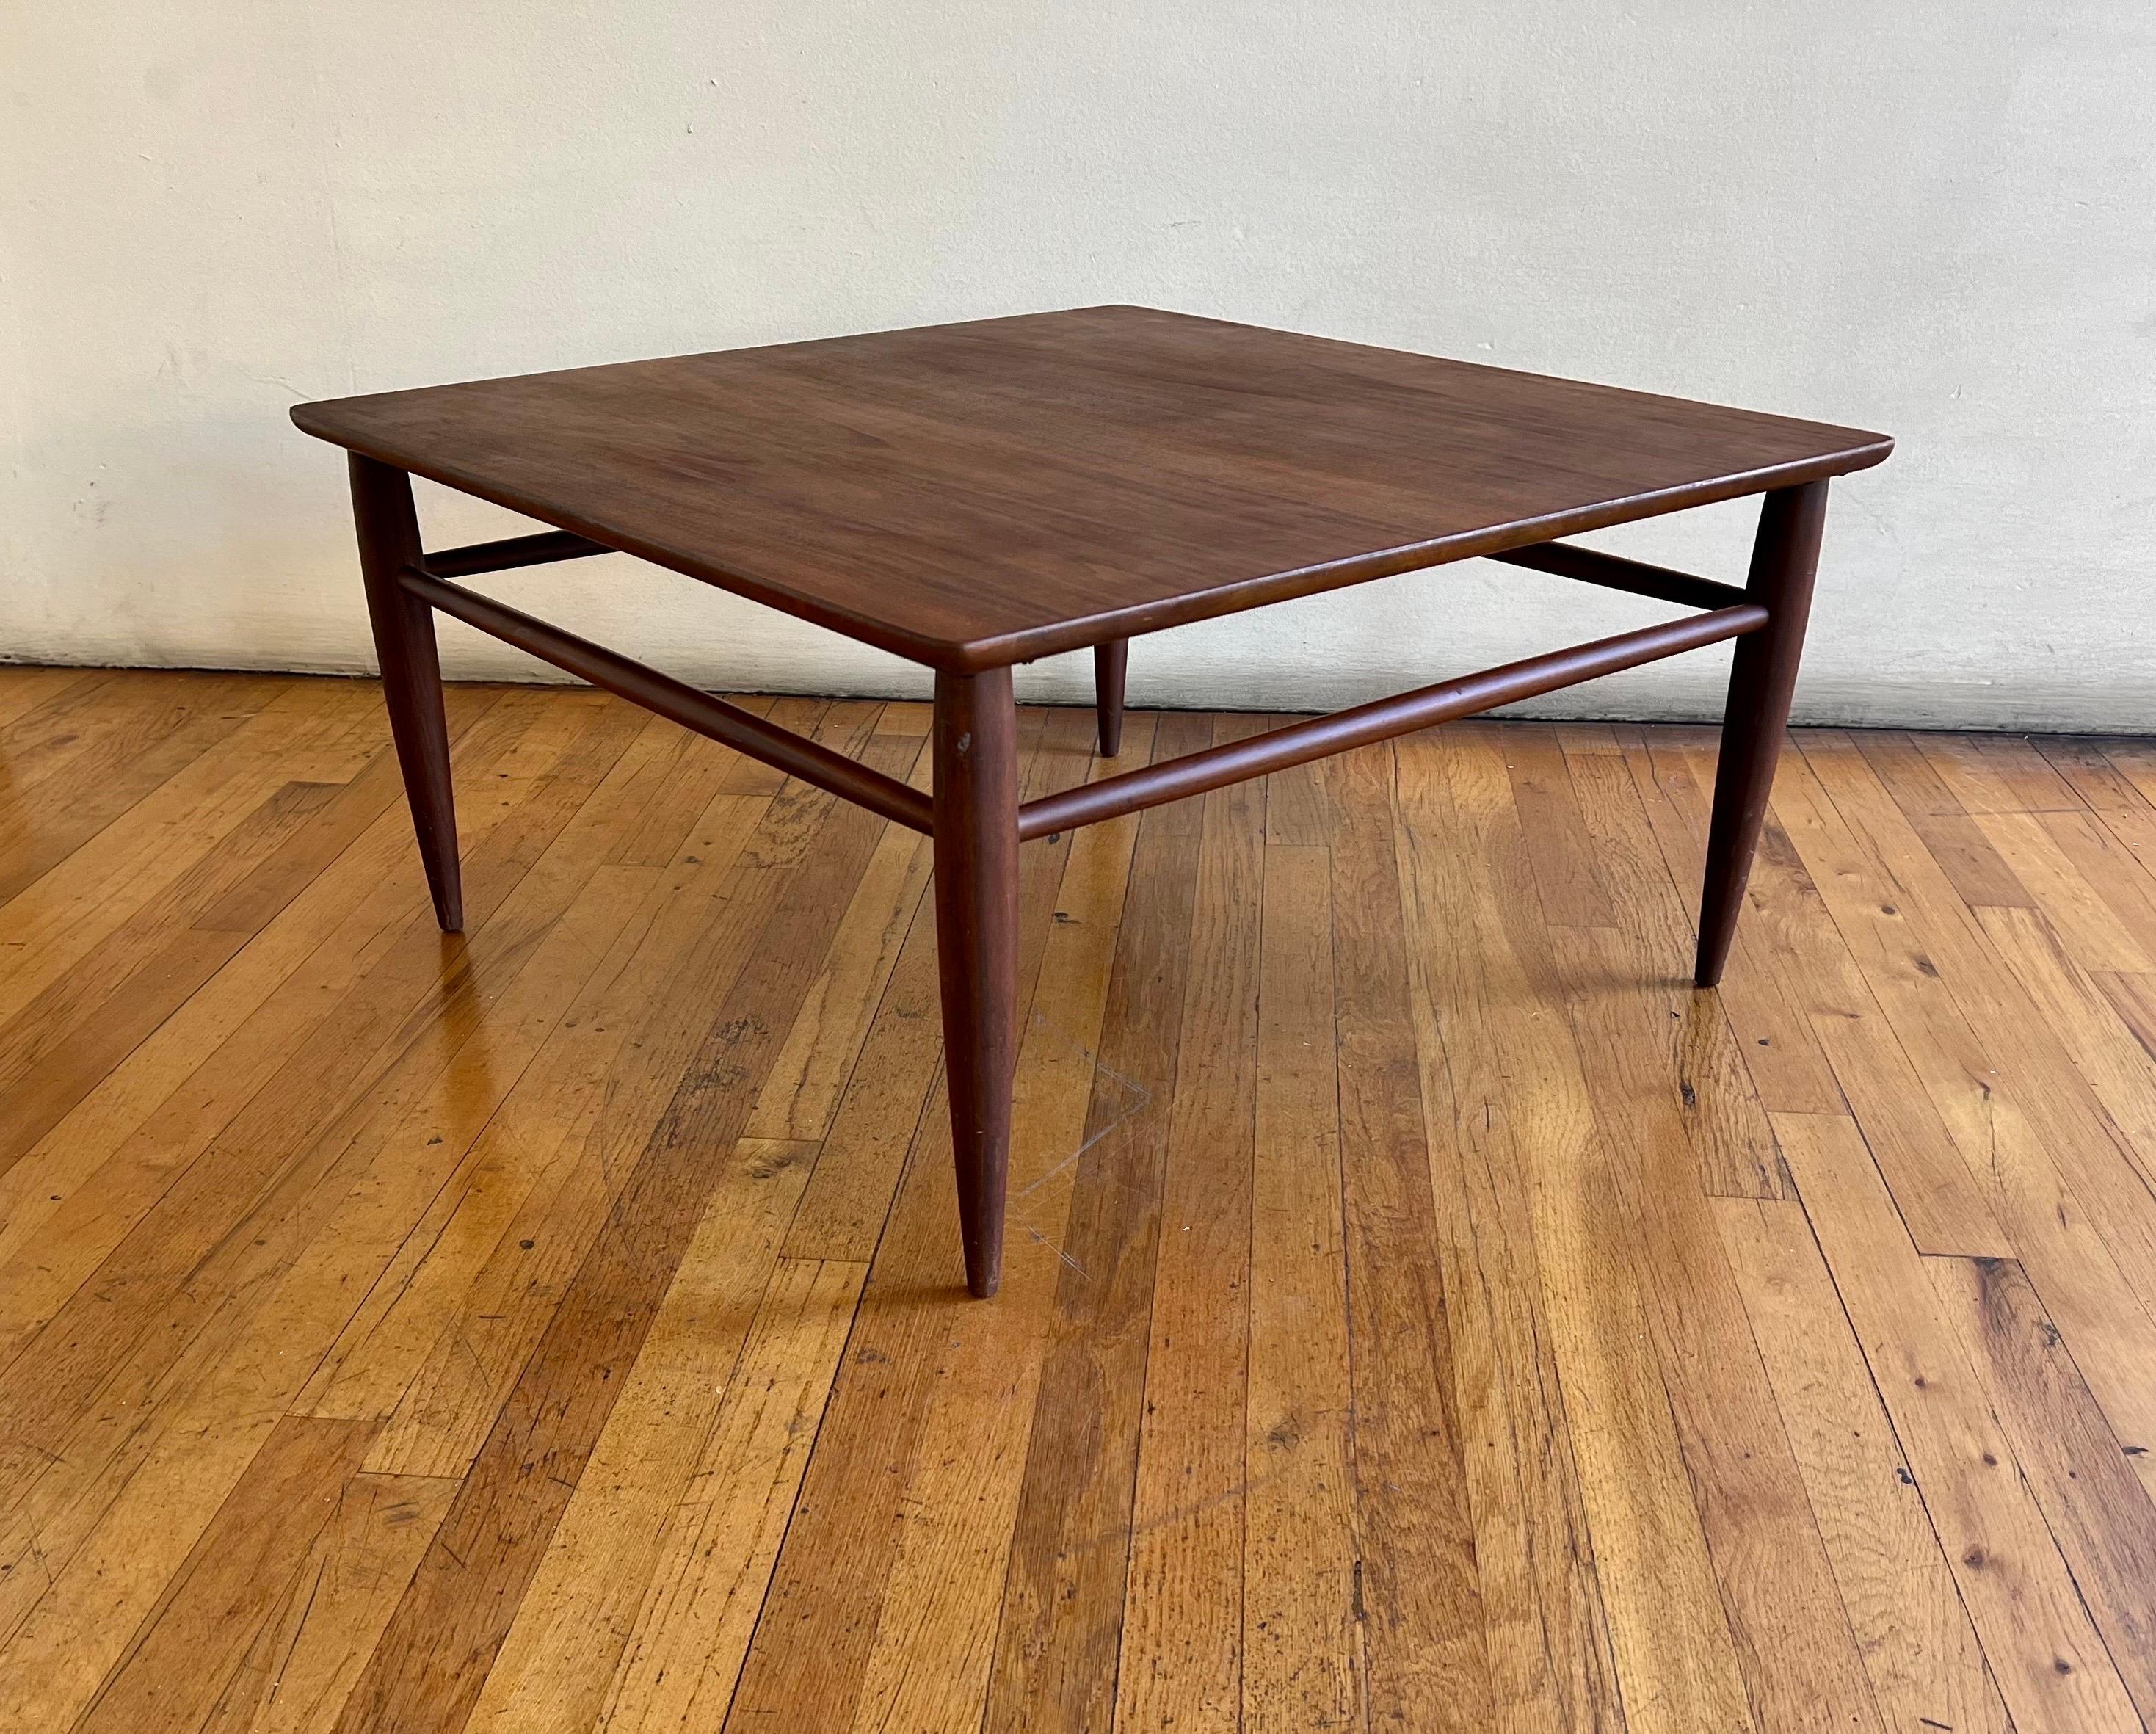 20th Century American Mid-Century Modern Square Coffee Table in Walnut